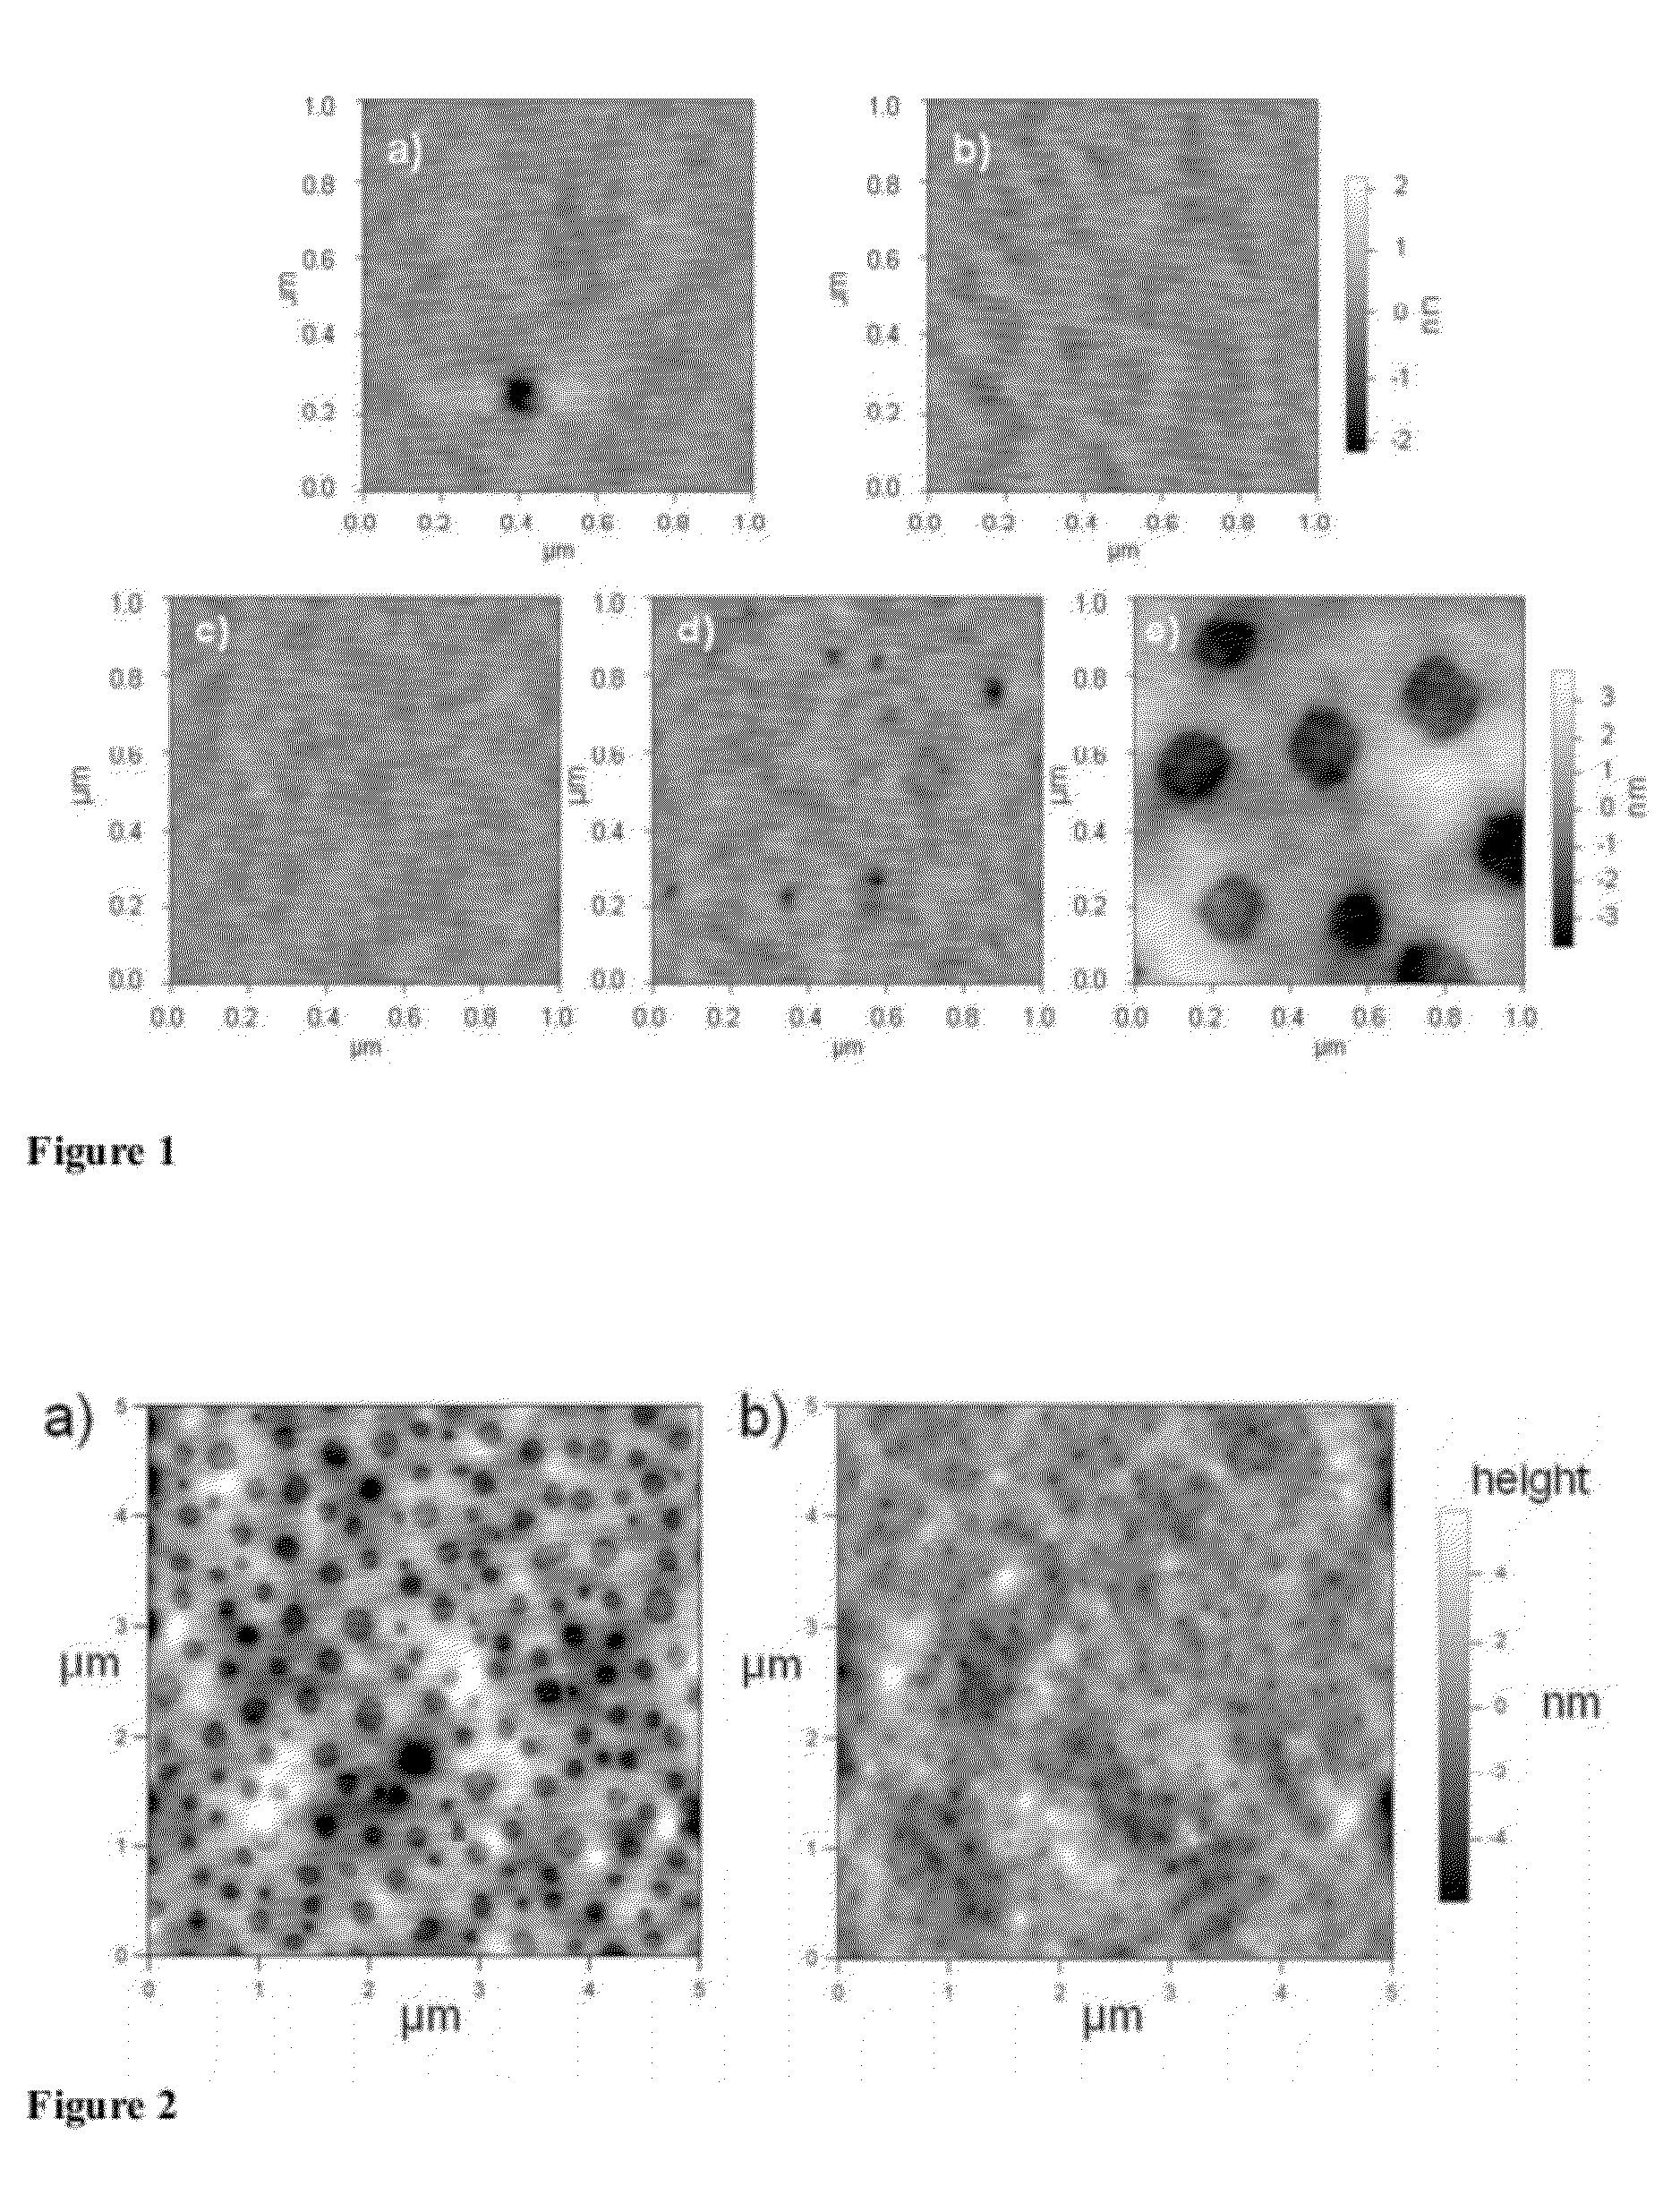 Anti-Fouling Coating Compositions and Methods For Preventing the Fouling of Surfaces